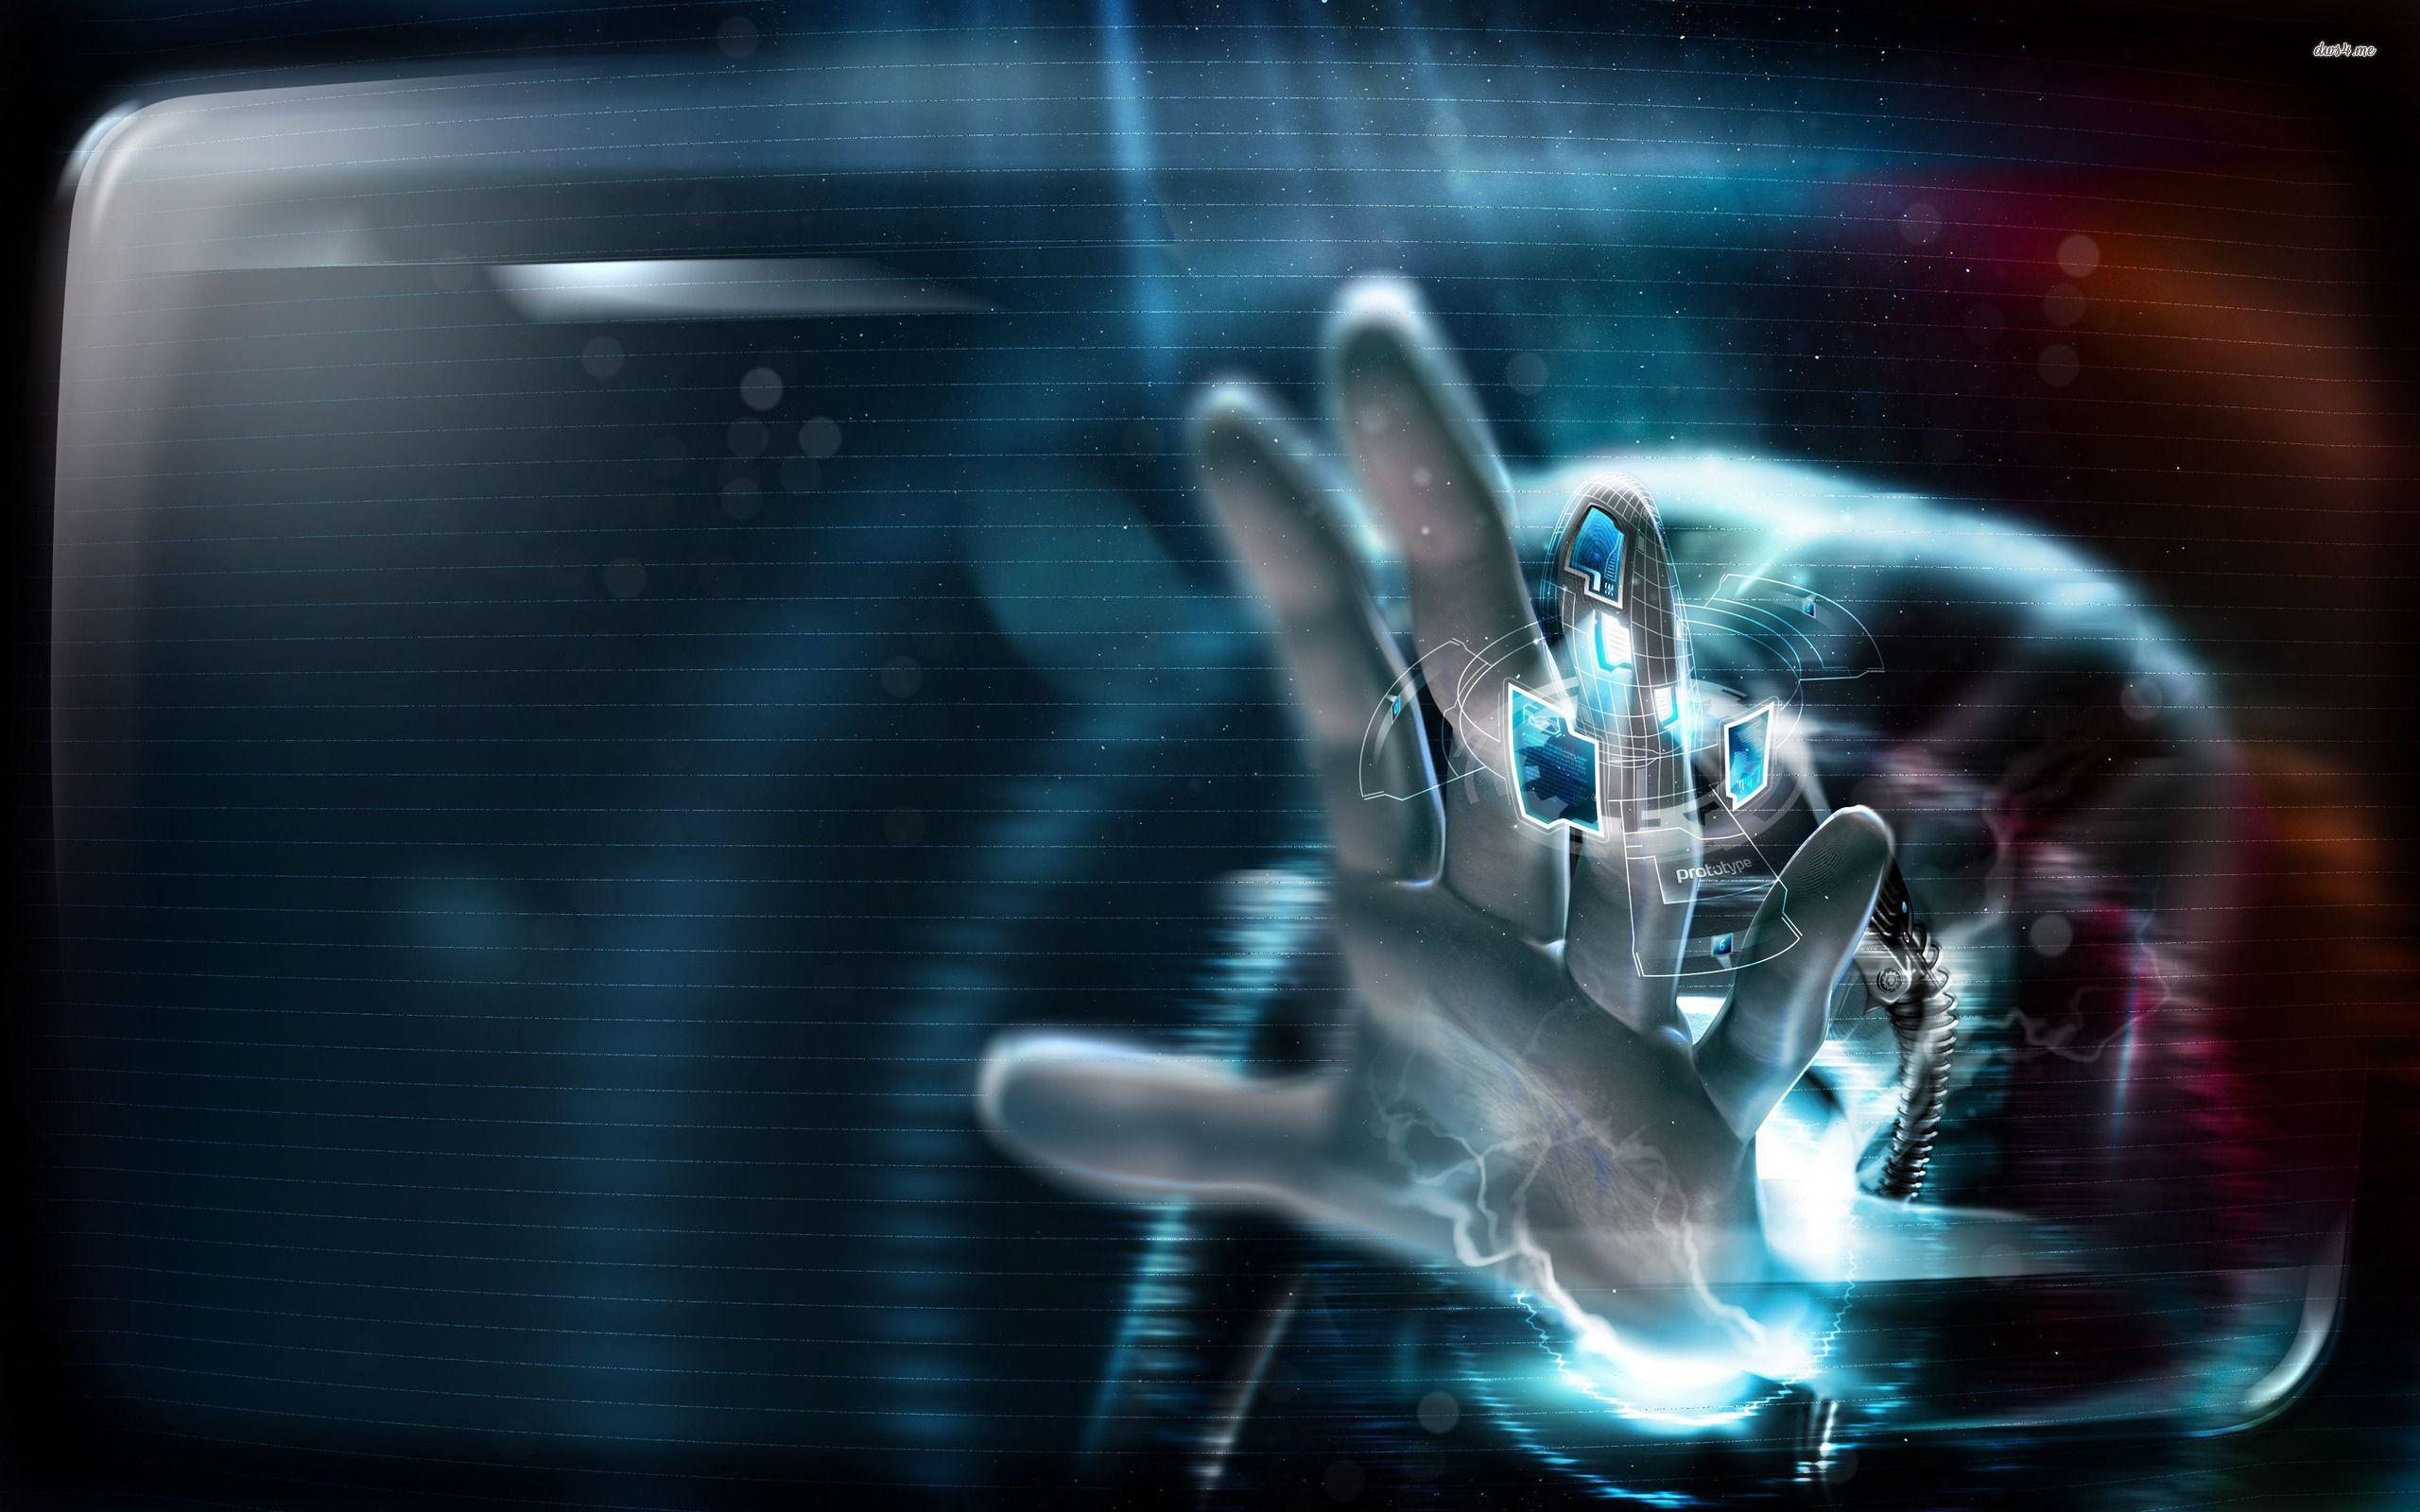 Download wallpaper Sci Fi Hand with tags: Windows XP, Hand